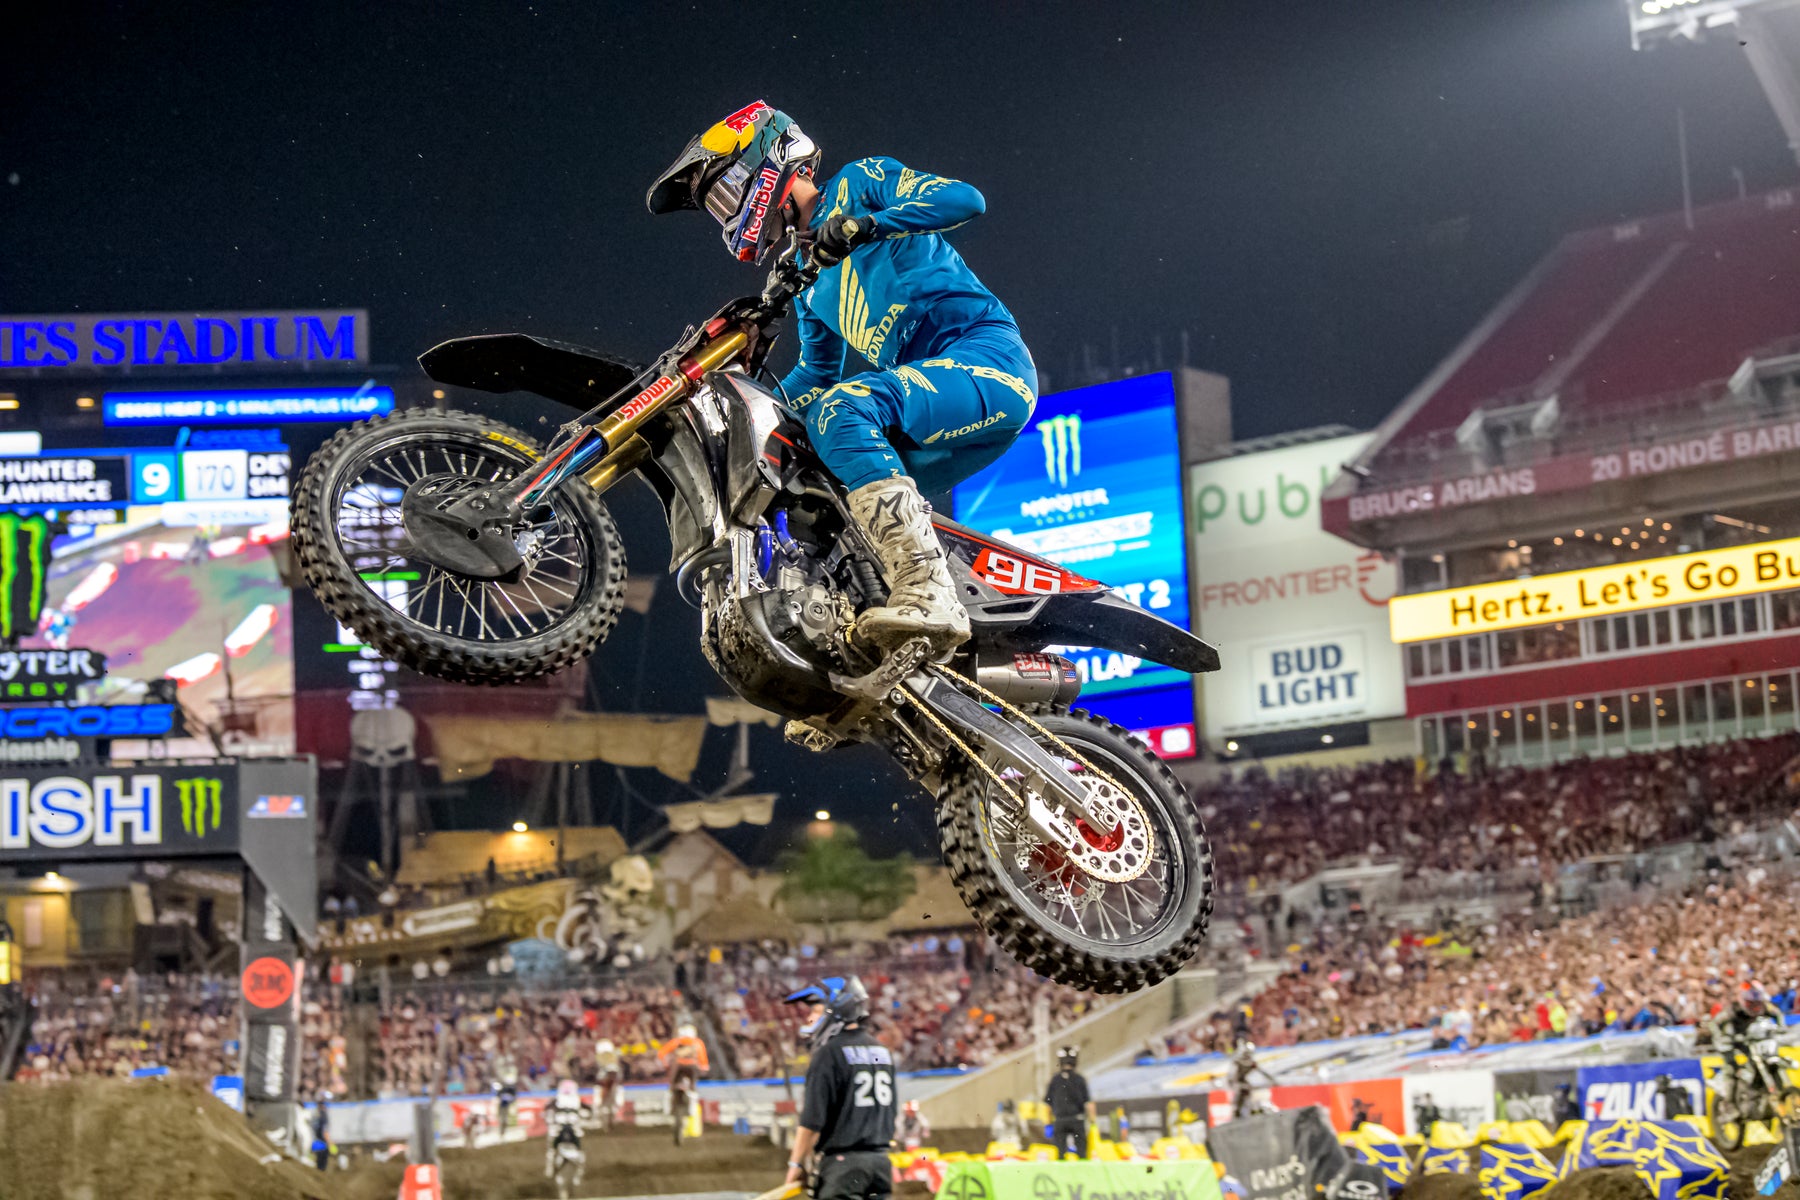 ALPINESTARS TOP FOUR LOCK-OUT AS HUNTER LAWRENCE AND NATE THRASHER DELIVER LAST LAP THRILLER IN 250SX EAST RACE IN TAMPA